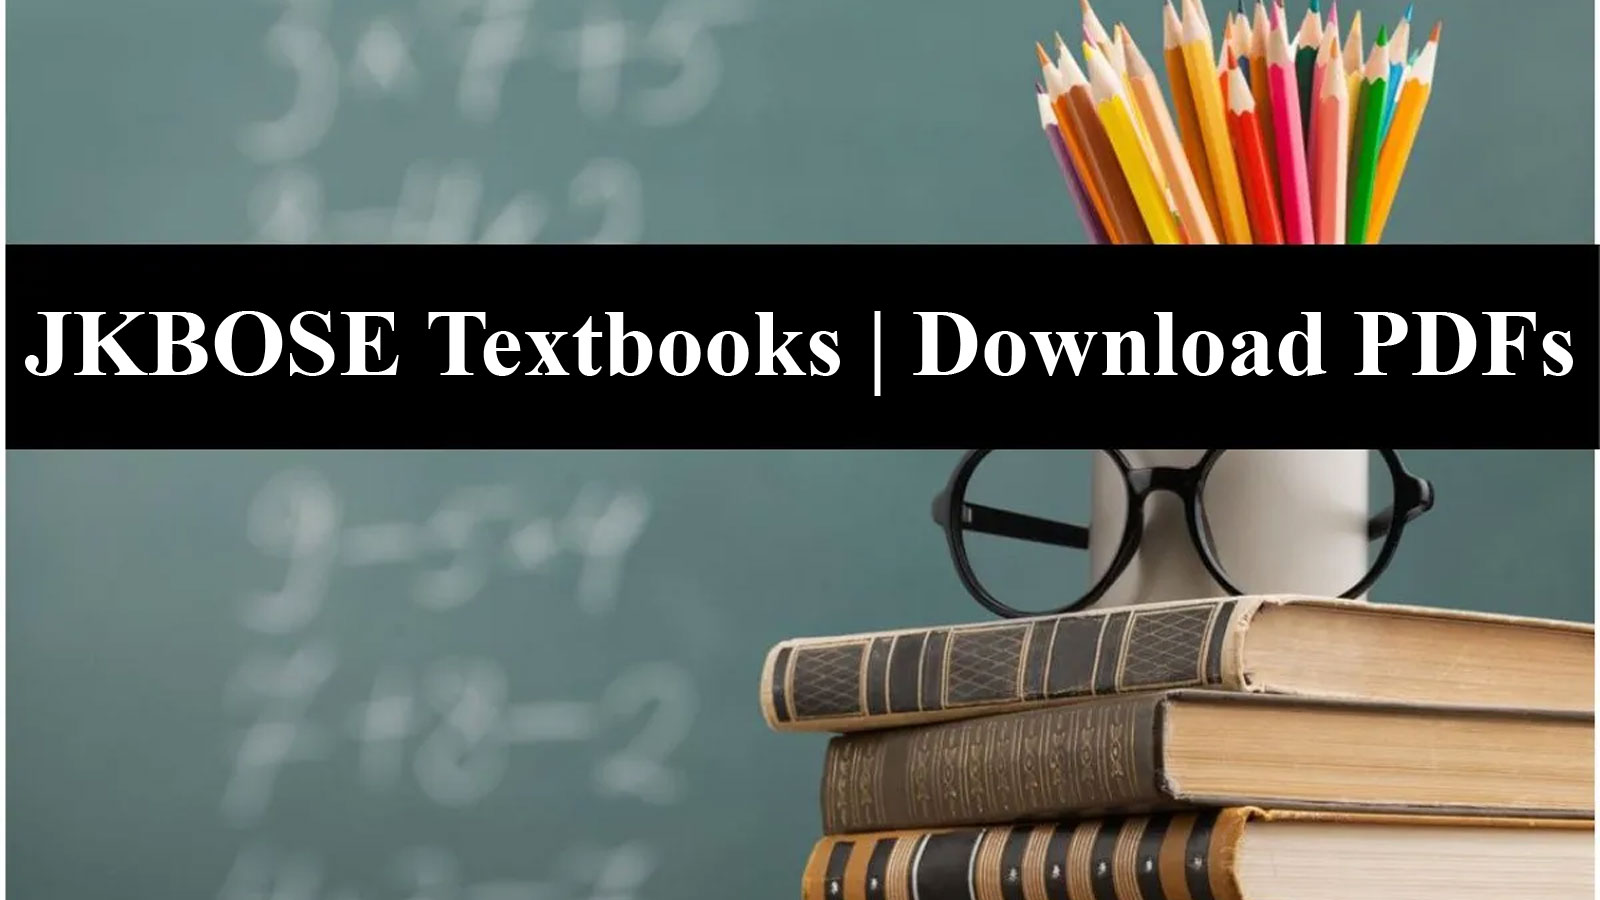 JKBOSE Class I Textbooks; Direct Link to Download PDFs